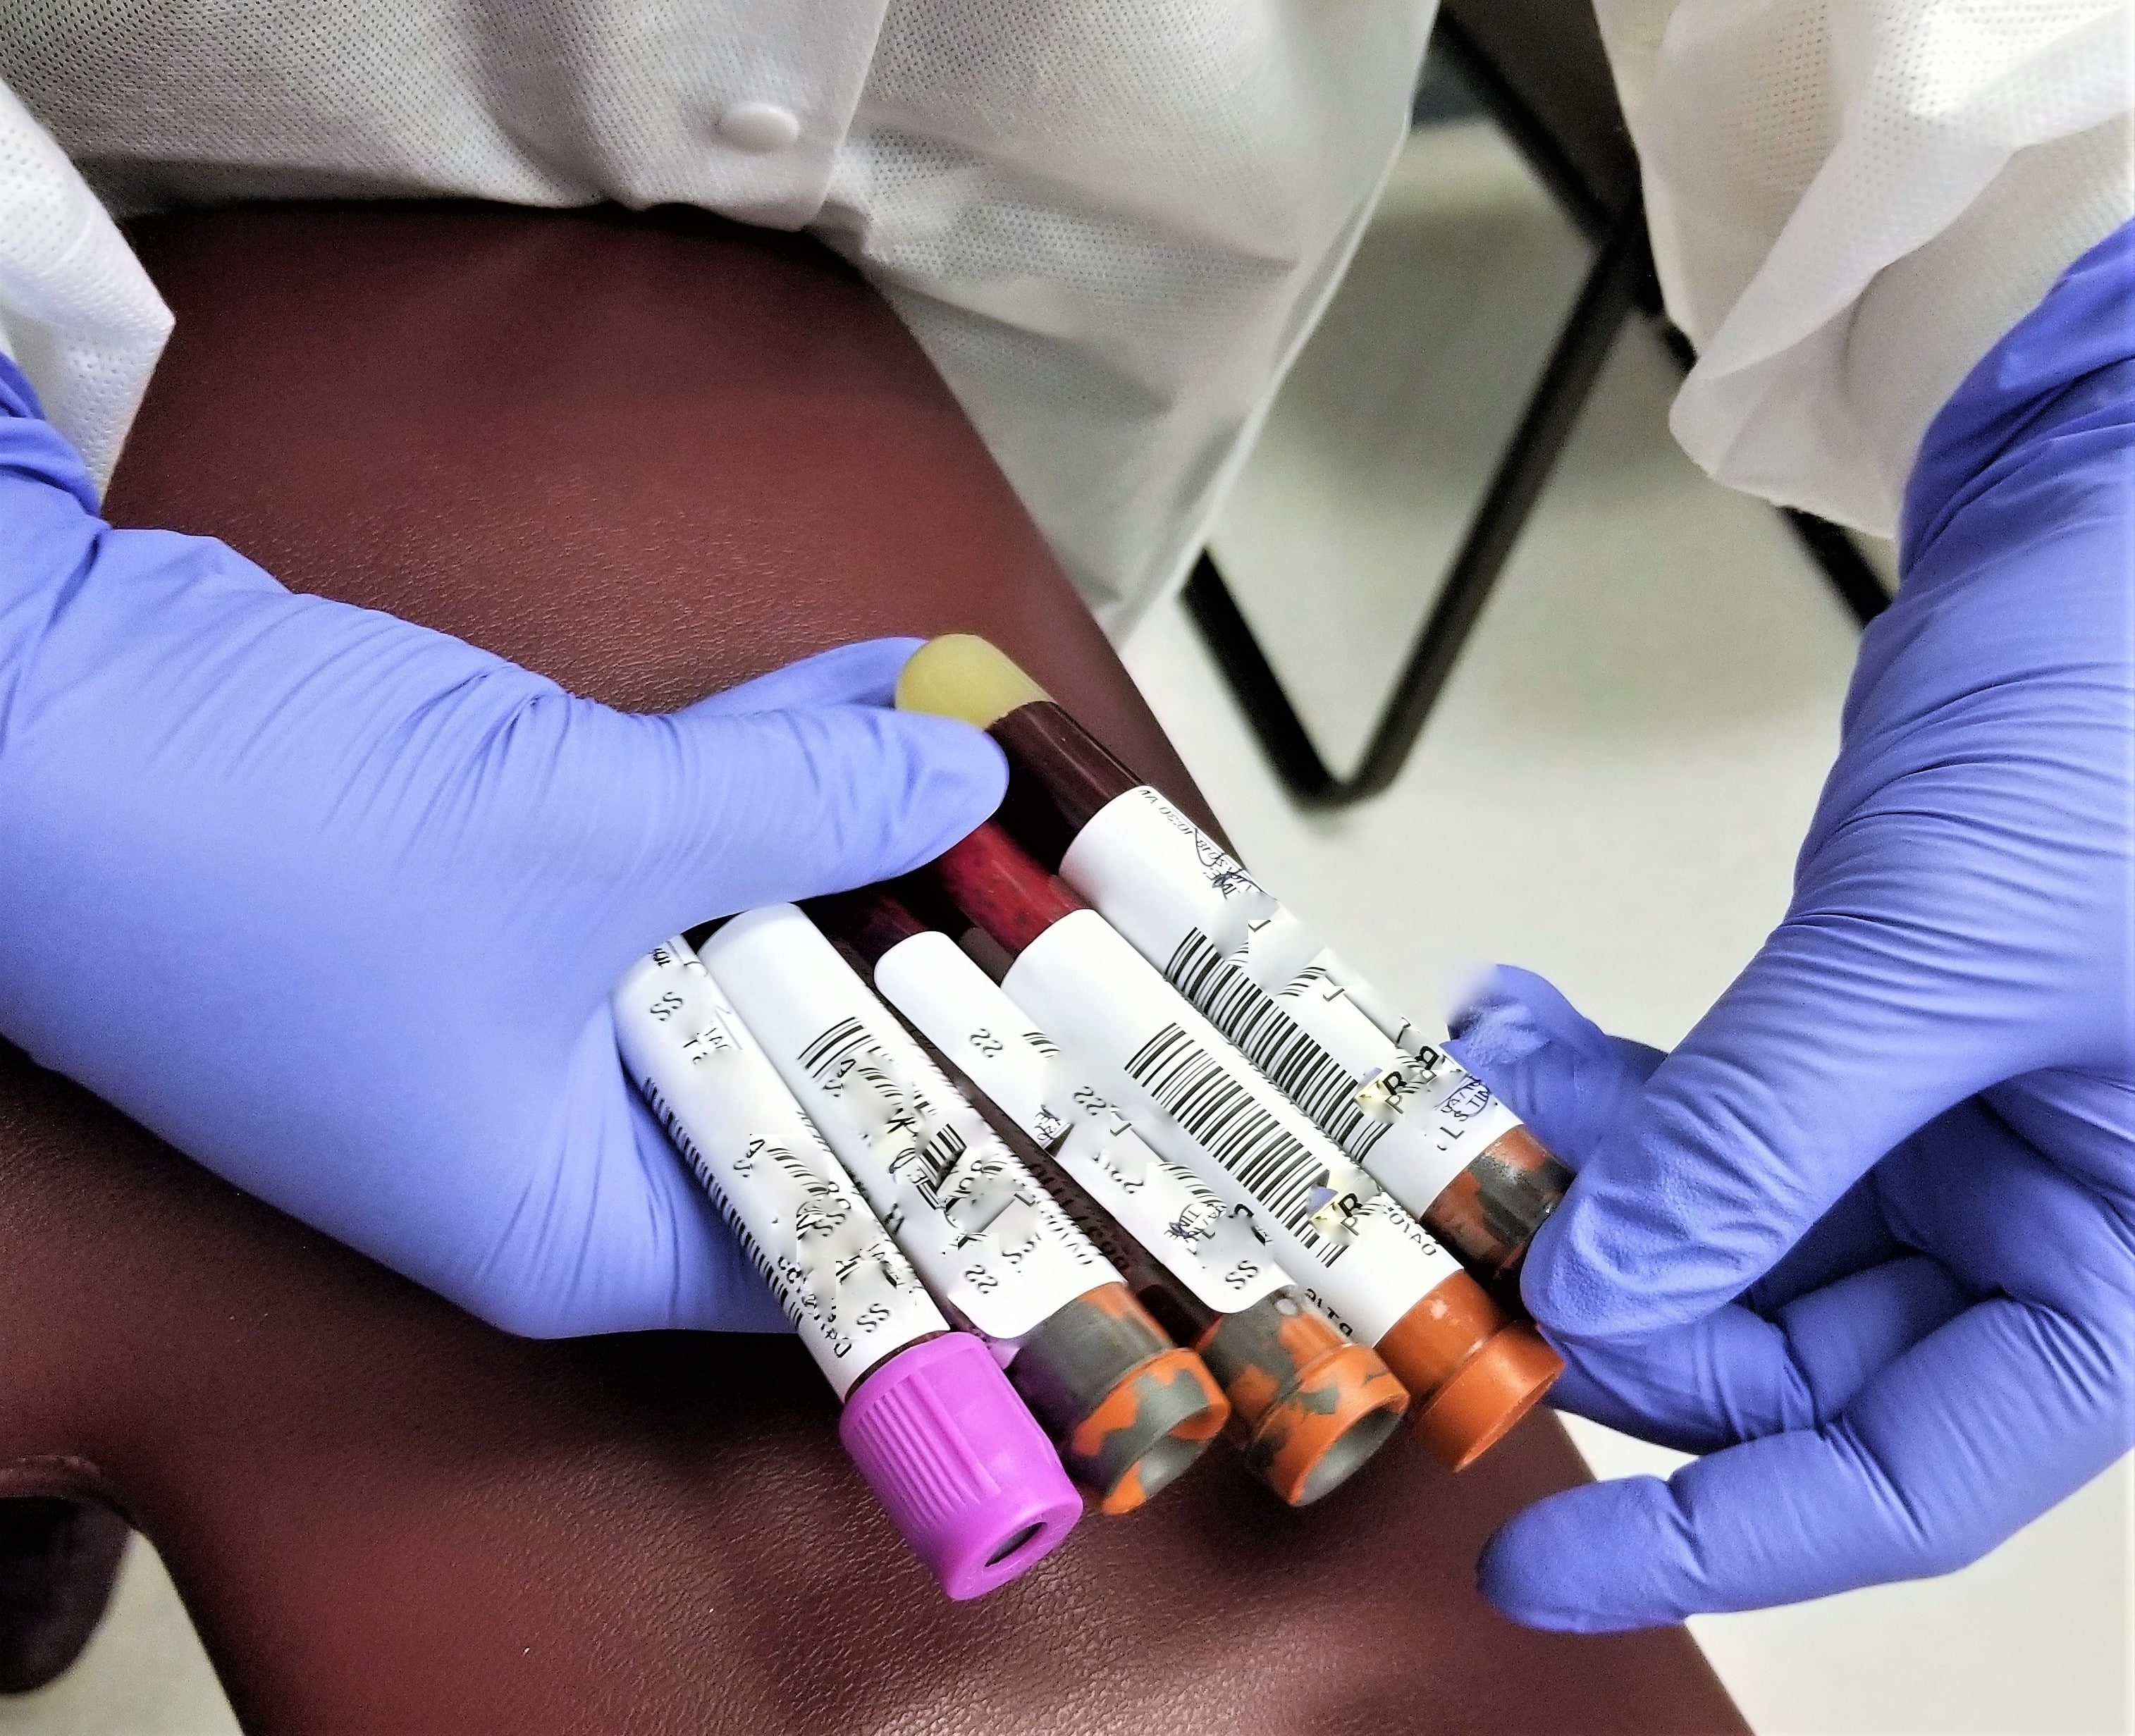 Cardio-Phlebotomy Technician | What Do They Do?